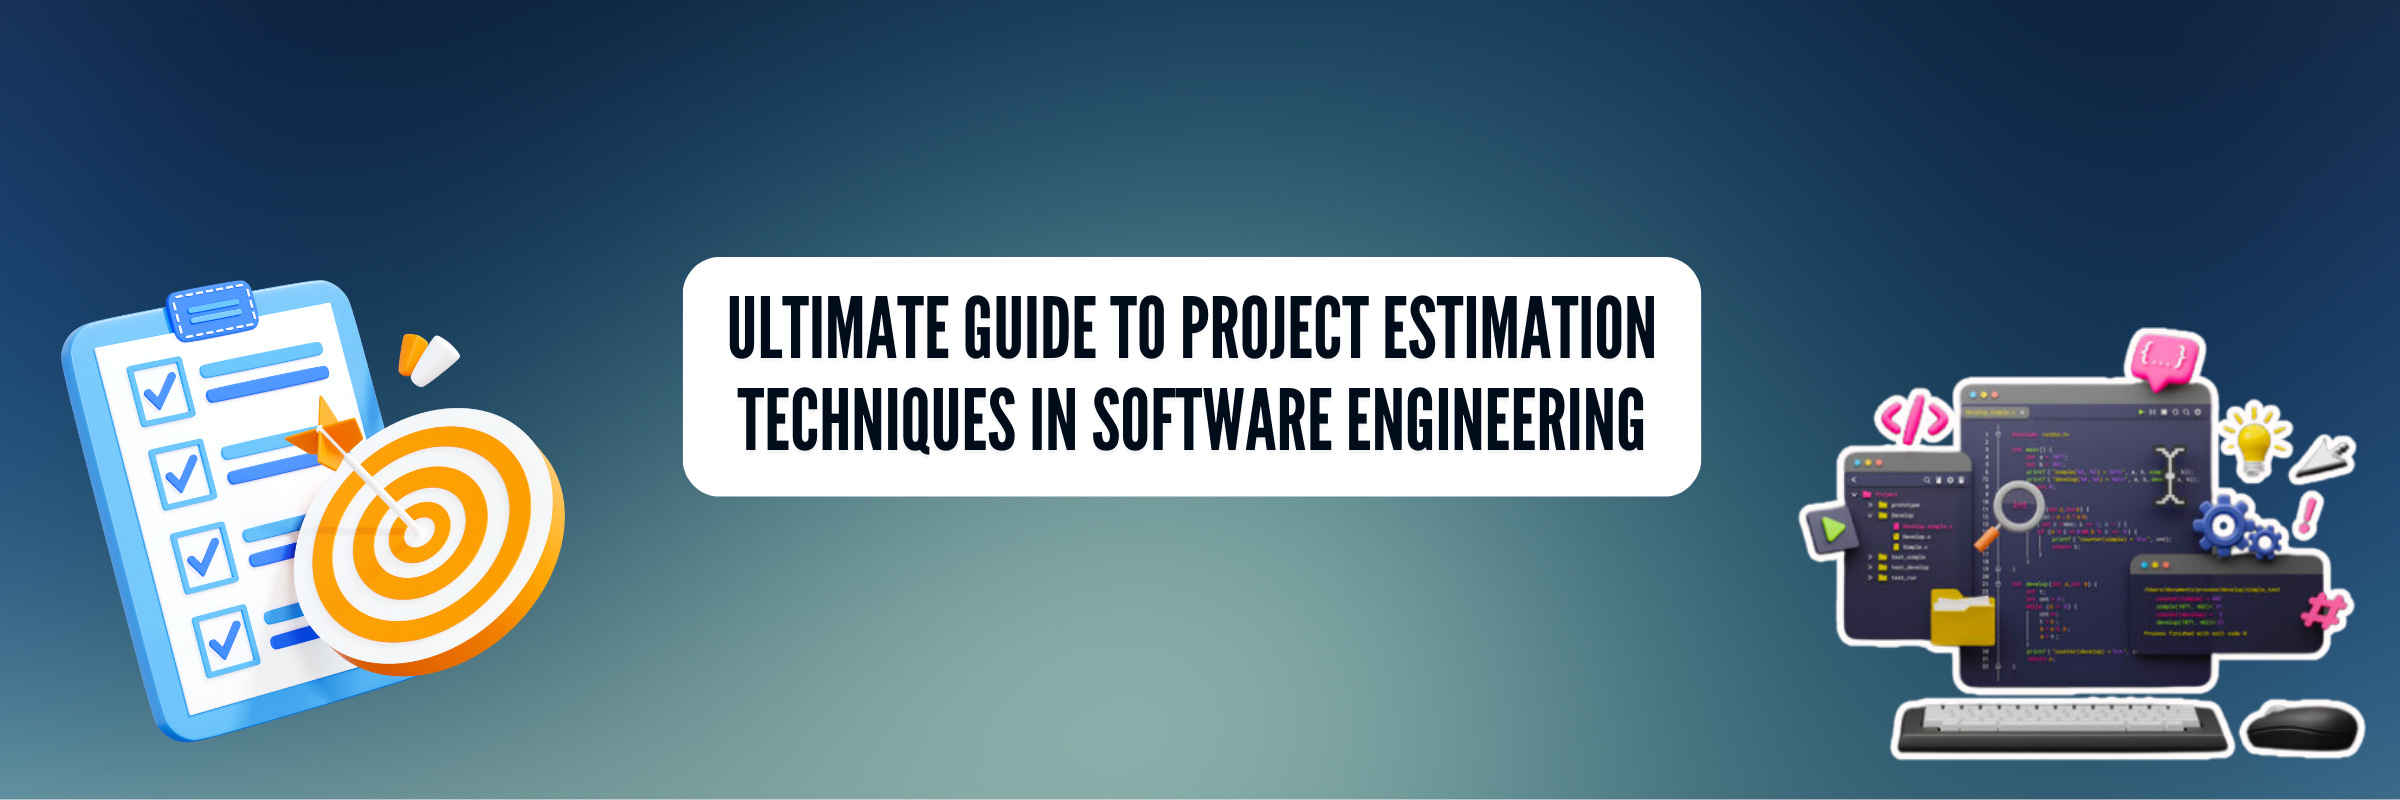 Ultimate Guide to Project Estimation Techniques in Software Engineering